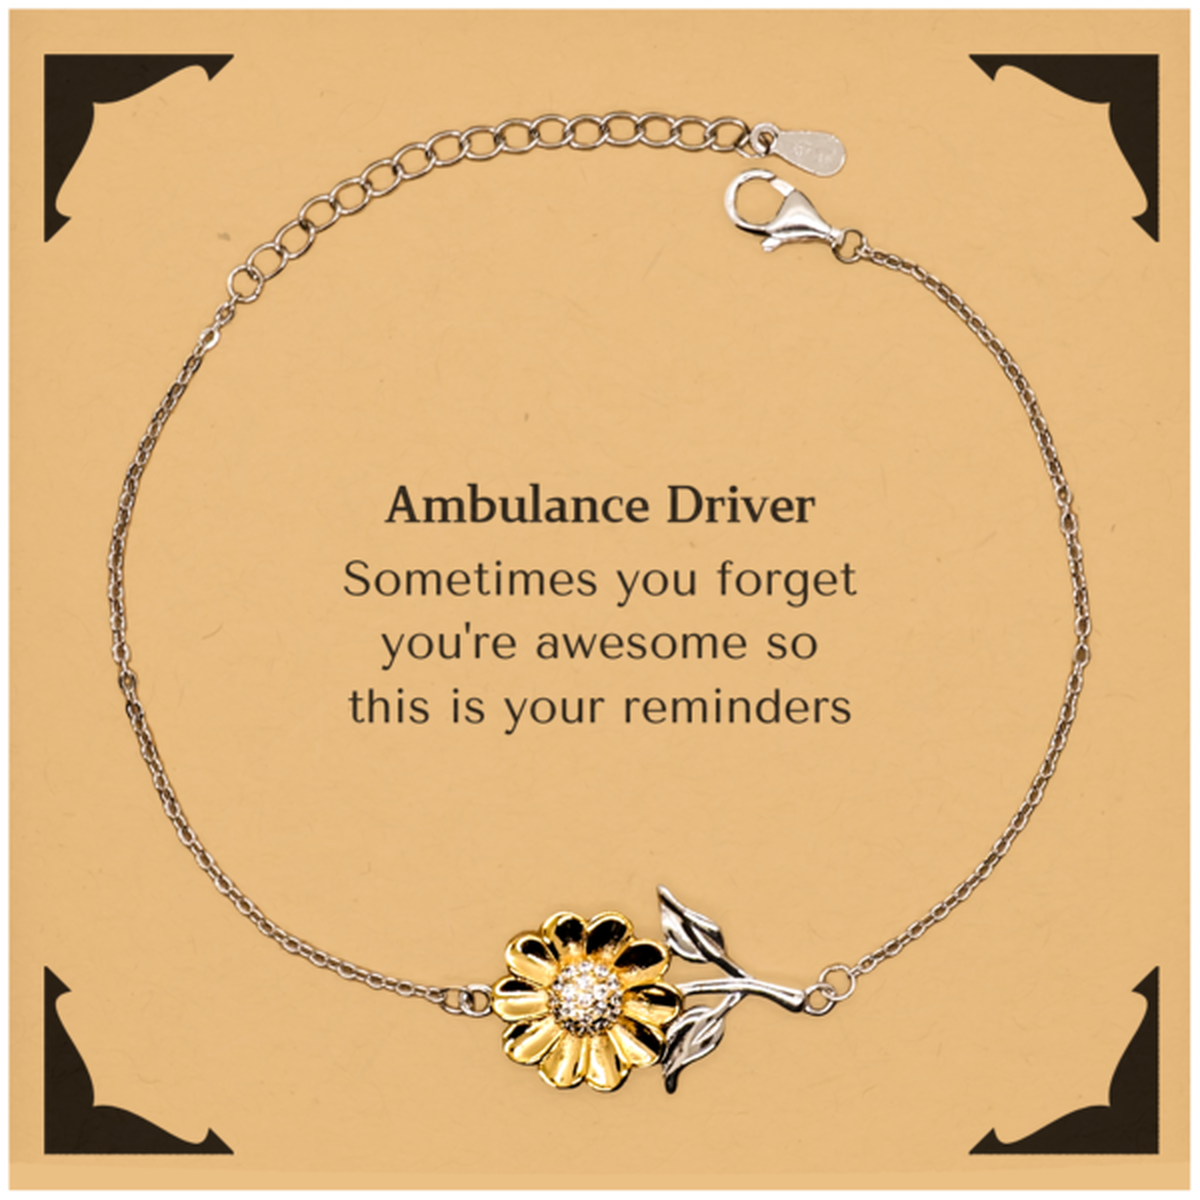 Sentimental Ambulance Driver Sunflower Bracelet, Ambulance Driver Sometimes you forget you're awesome so this is your reminders, Graduation Christmas Birthday Gifts for Ambulance Driver, Men, Women, Coworkers